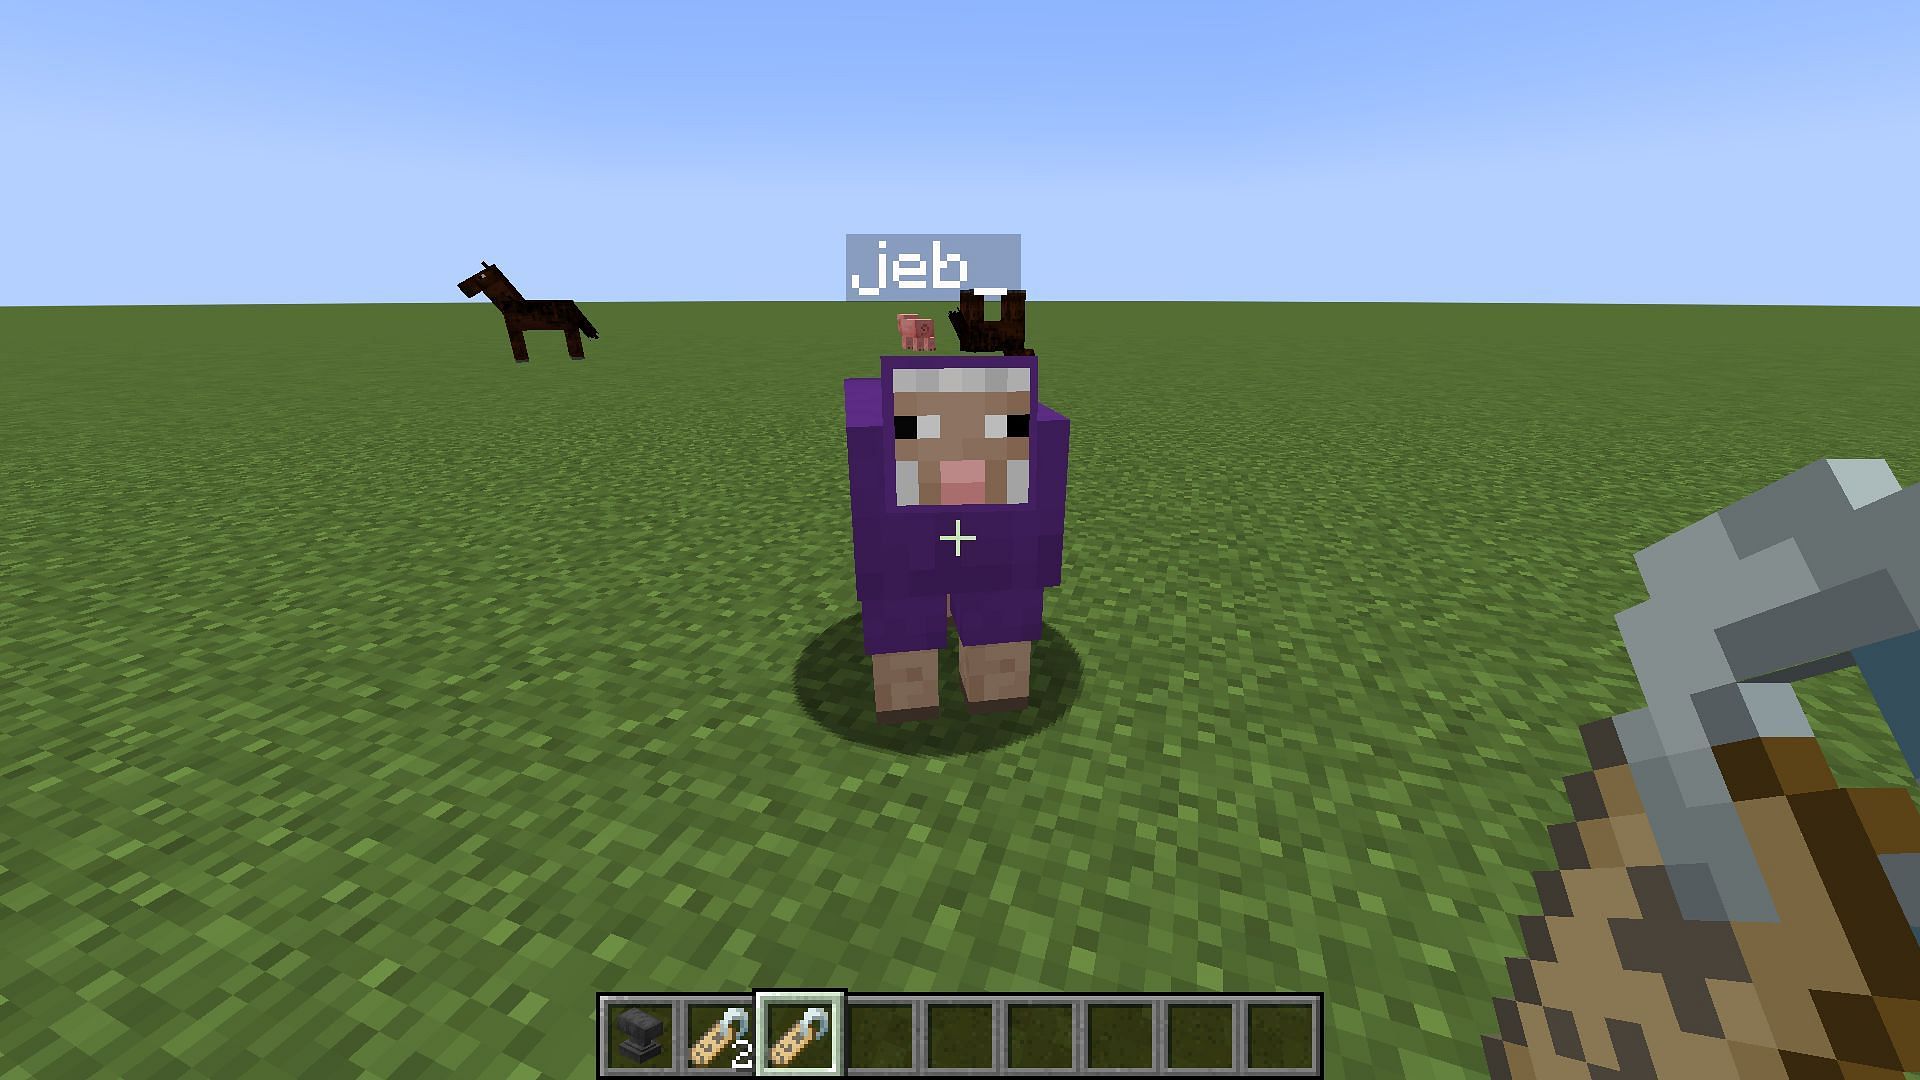 Sheep&#039;s color will cycle through rainbow colors once it is named &#039;jeb_&#039; in Minecraft (Image via Mojang)